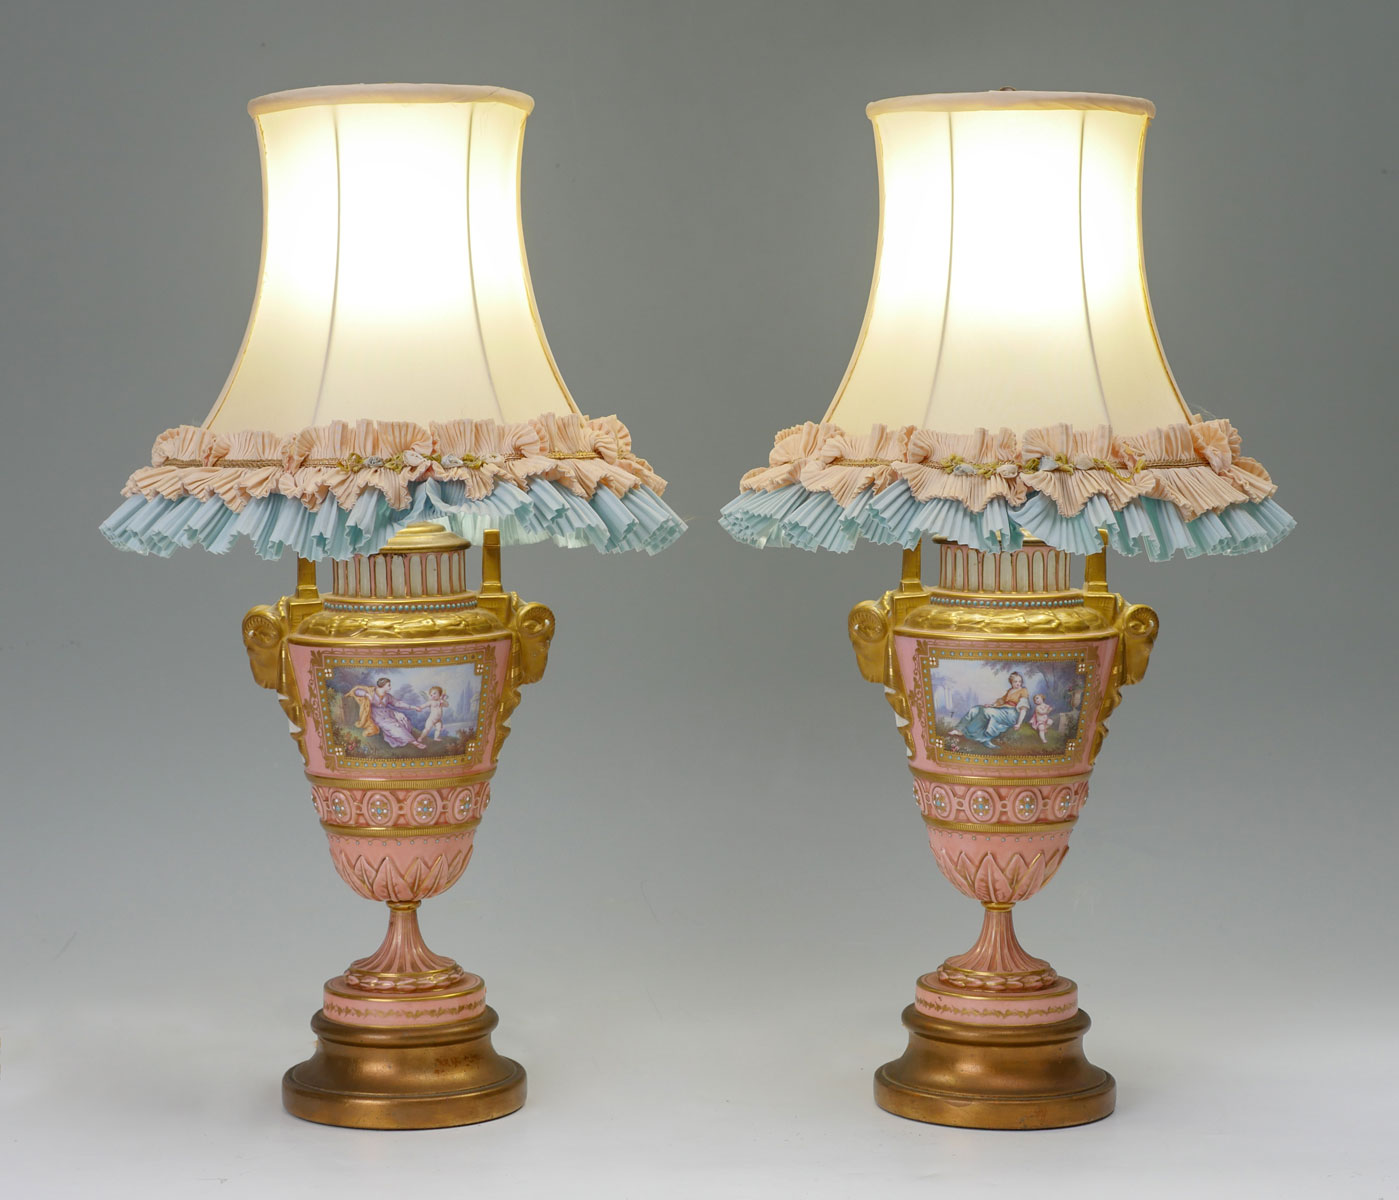 PAIR OF PINK SEVRES LAMPS: 2 Pink